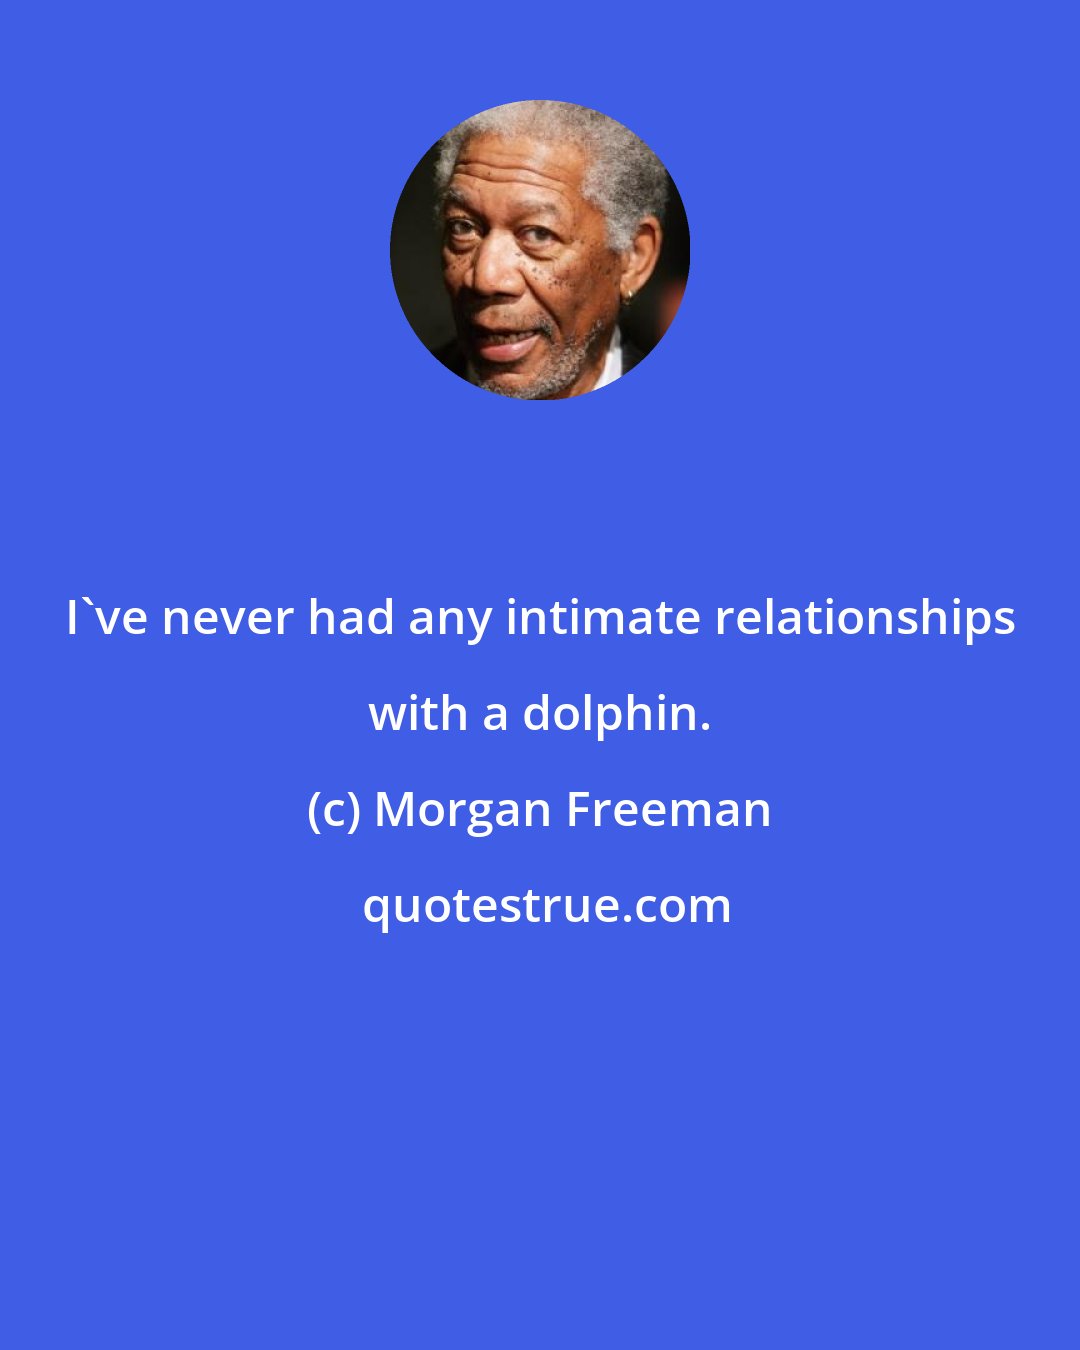 Morgan Freeman: I've never had any intimate relationships with a dolphin.